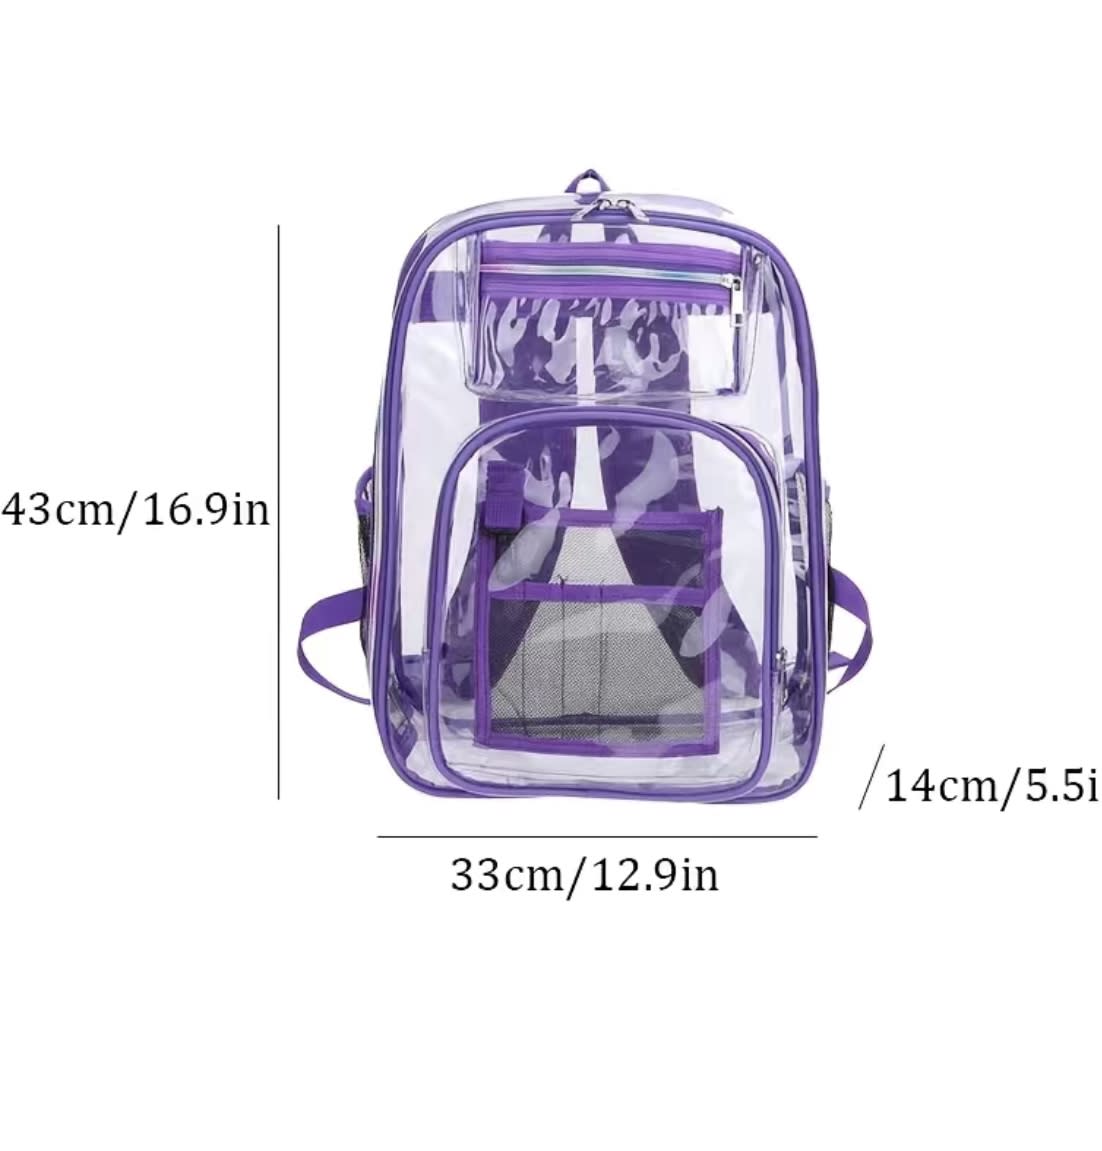 Discount School Supply® Premium Clear Student Backpack